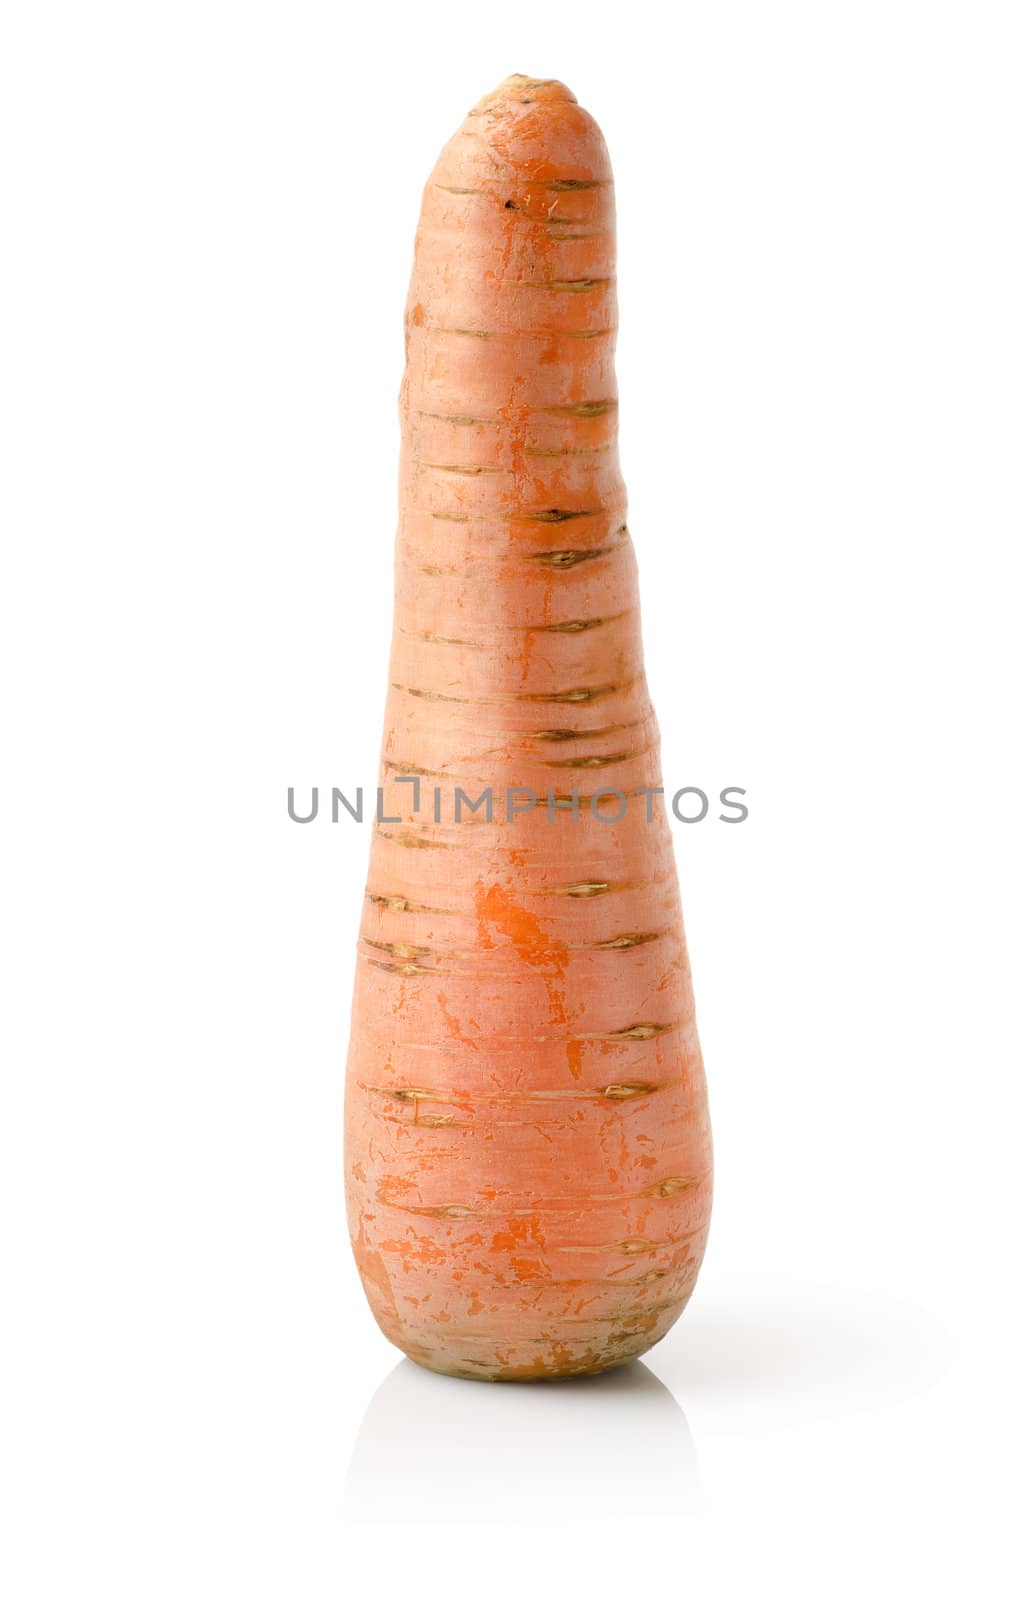 Fresh carrot isolated on a white background